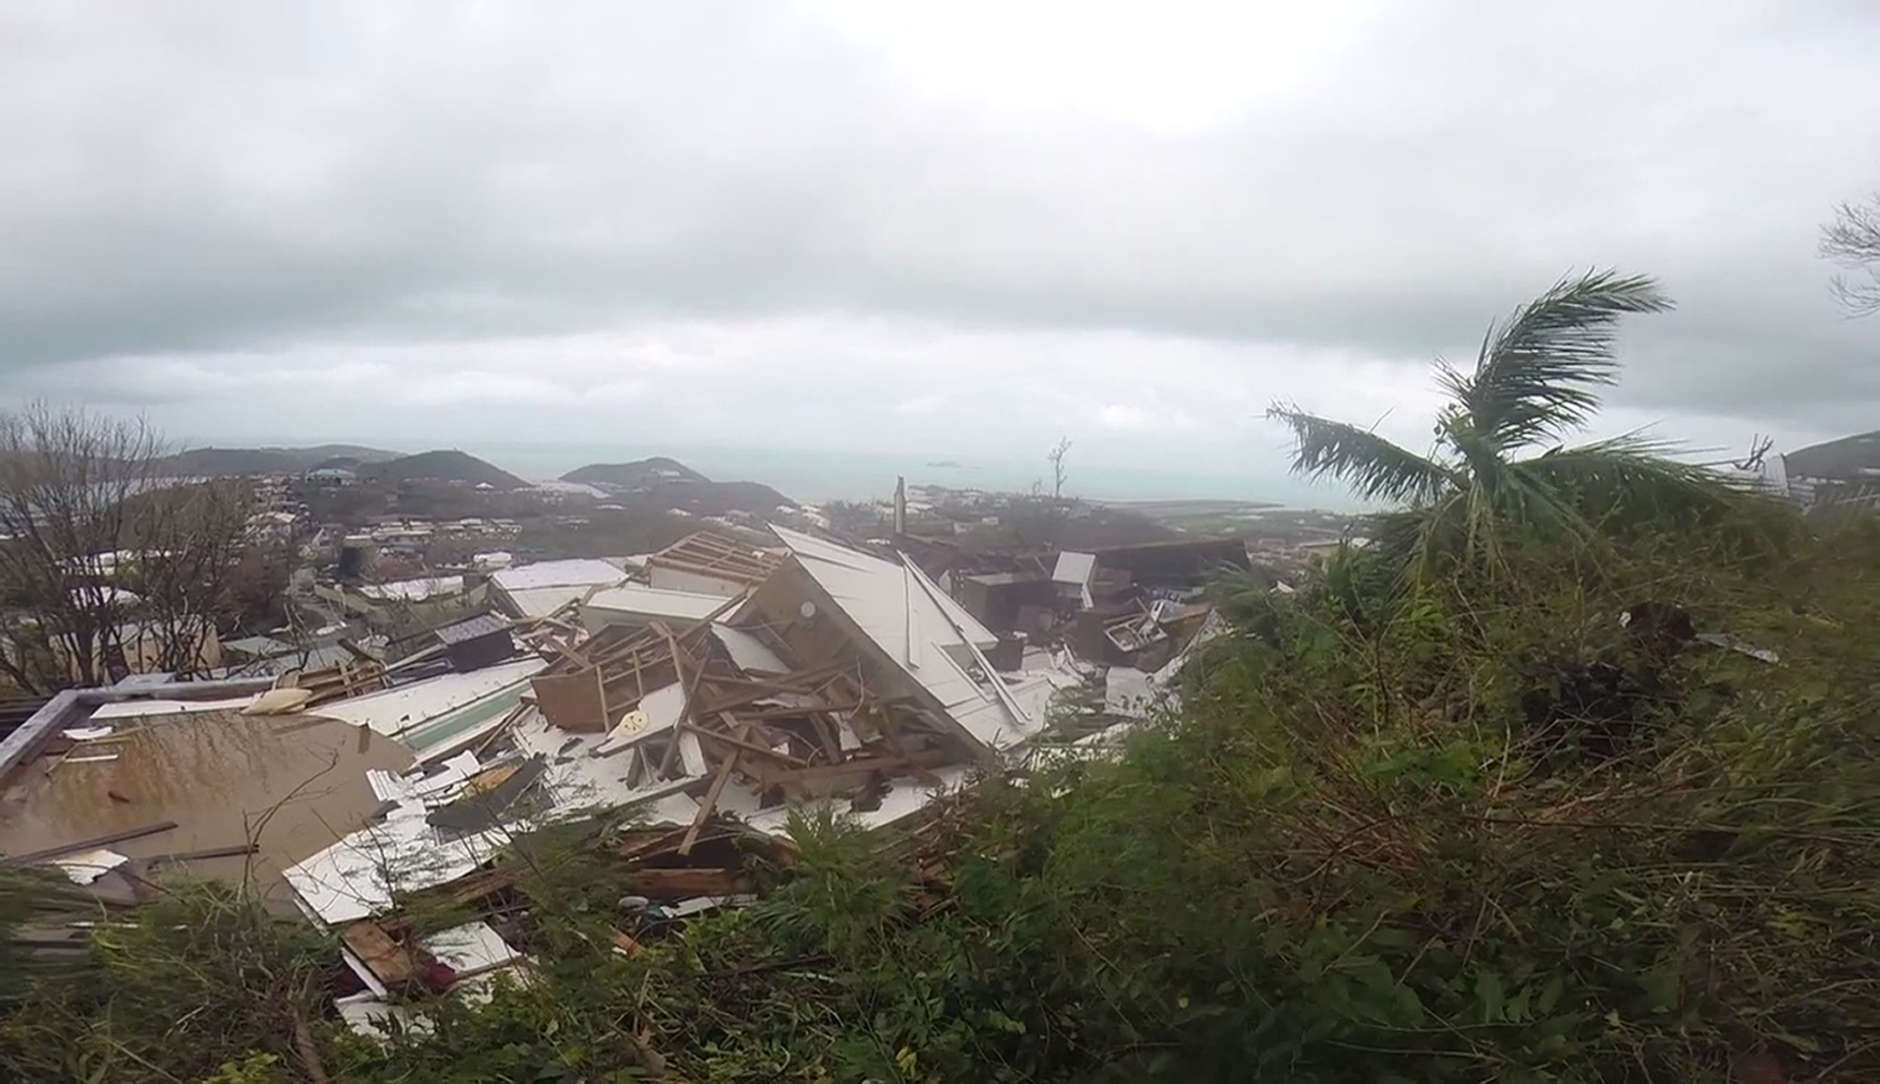 This image made from video shows several damaged houses by Hurricane Irma in St. Thomas, U.S. Virgin Islands, Thursday, Sept. 7, 2017. Hurricane Irma weakened slightly Thursday with sustained winds of 175 mph, according to the National Hurricane Center. The storm boasted 185 mph winds for a more than 24-hour period, making it the strongest storm ever recorded in the Atlantic Ocean. The storm was expected to arrive in Cuba by Friday. It could hit the Florida mainland by late Saturday, according to hurricane center models. (AP Photo/Ian Brown)